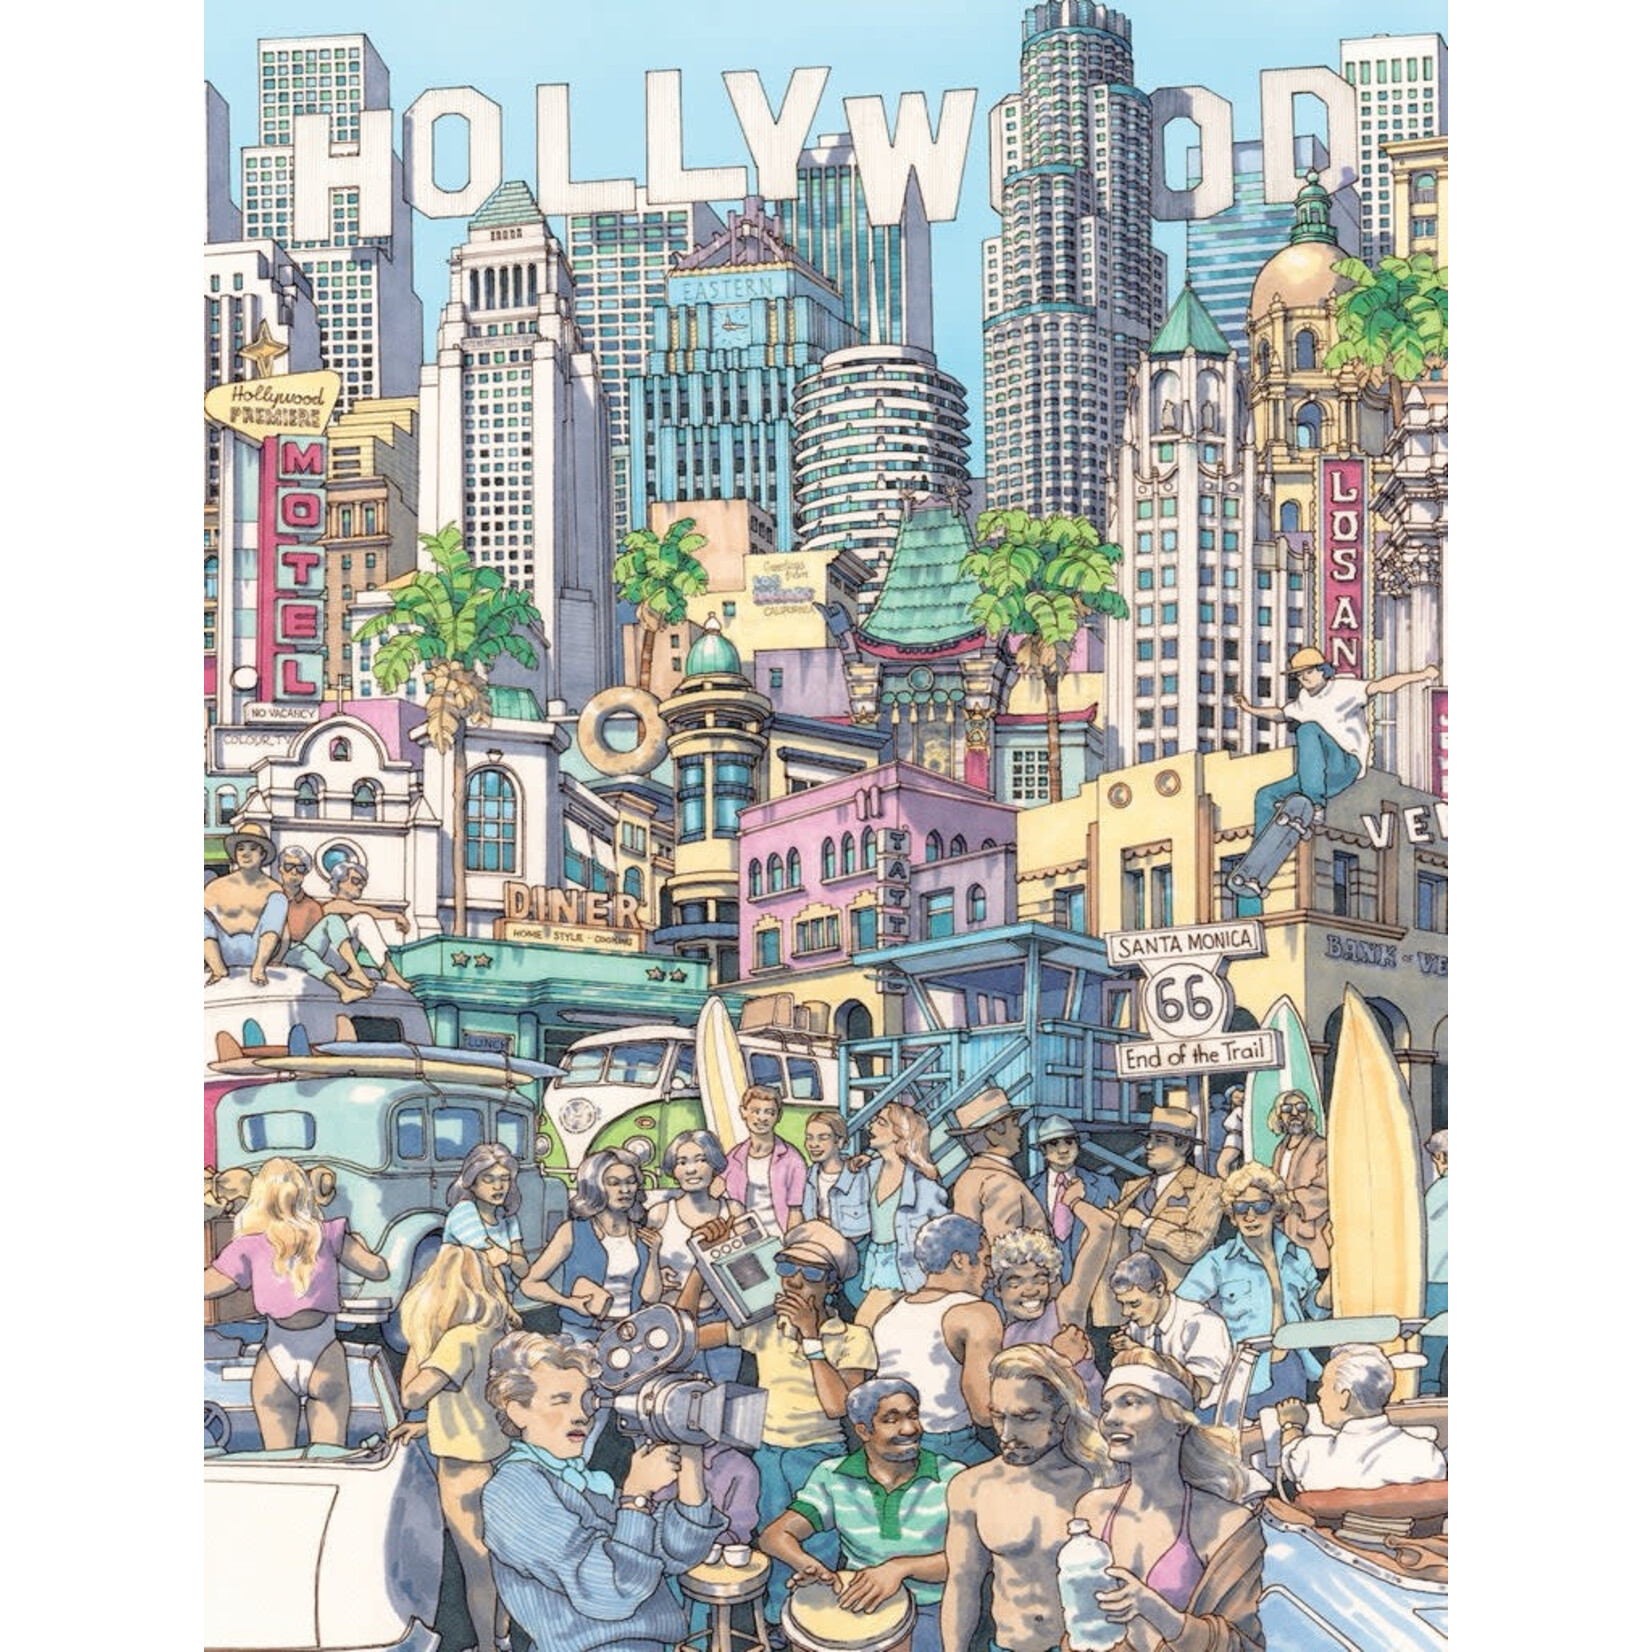 New York Puzzle Co Maxwell - California Dreaming 500 Piece Puzzle